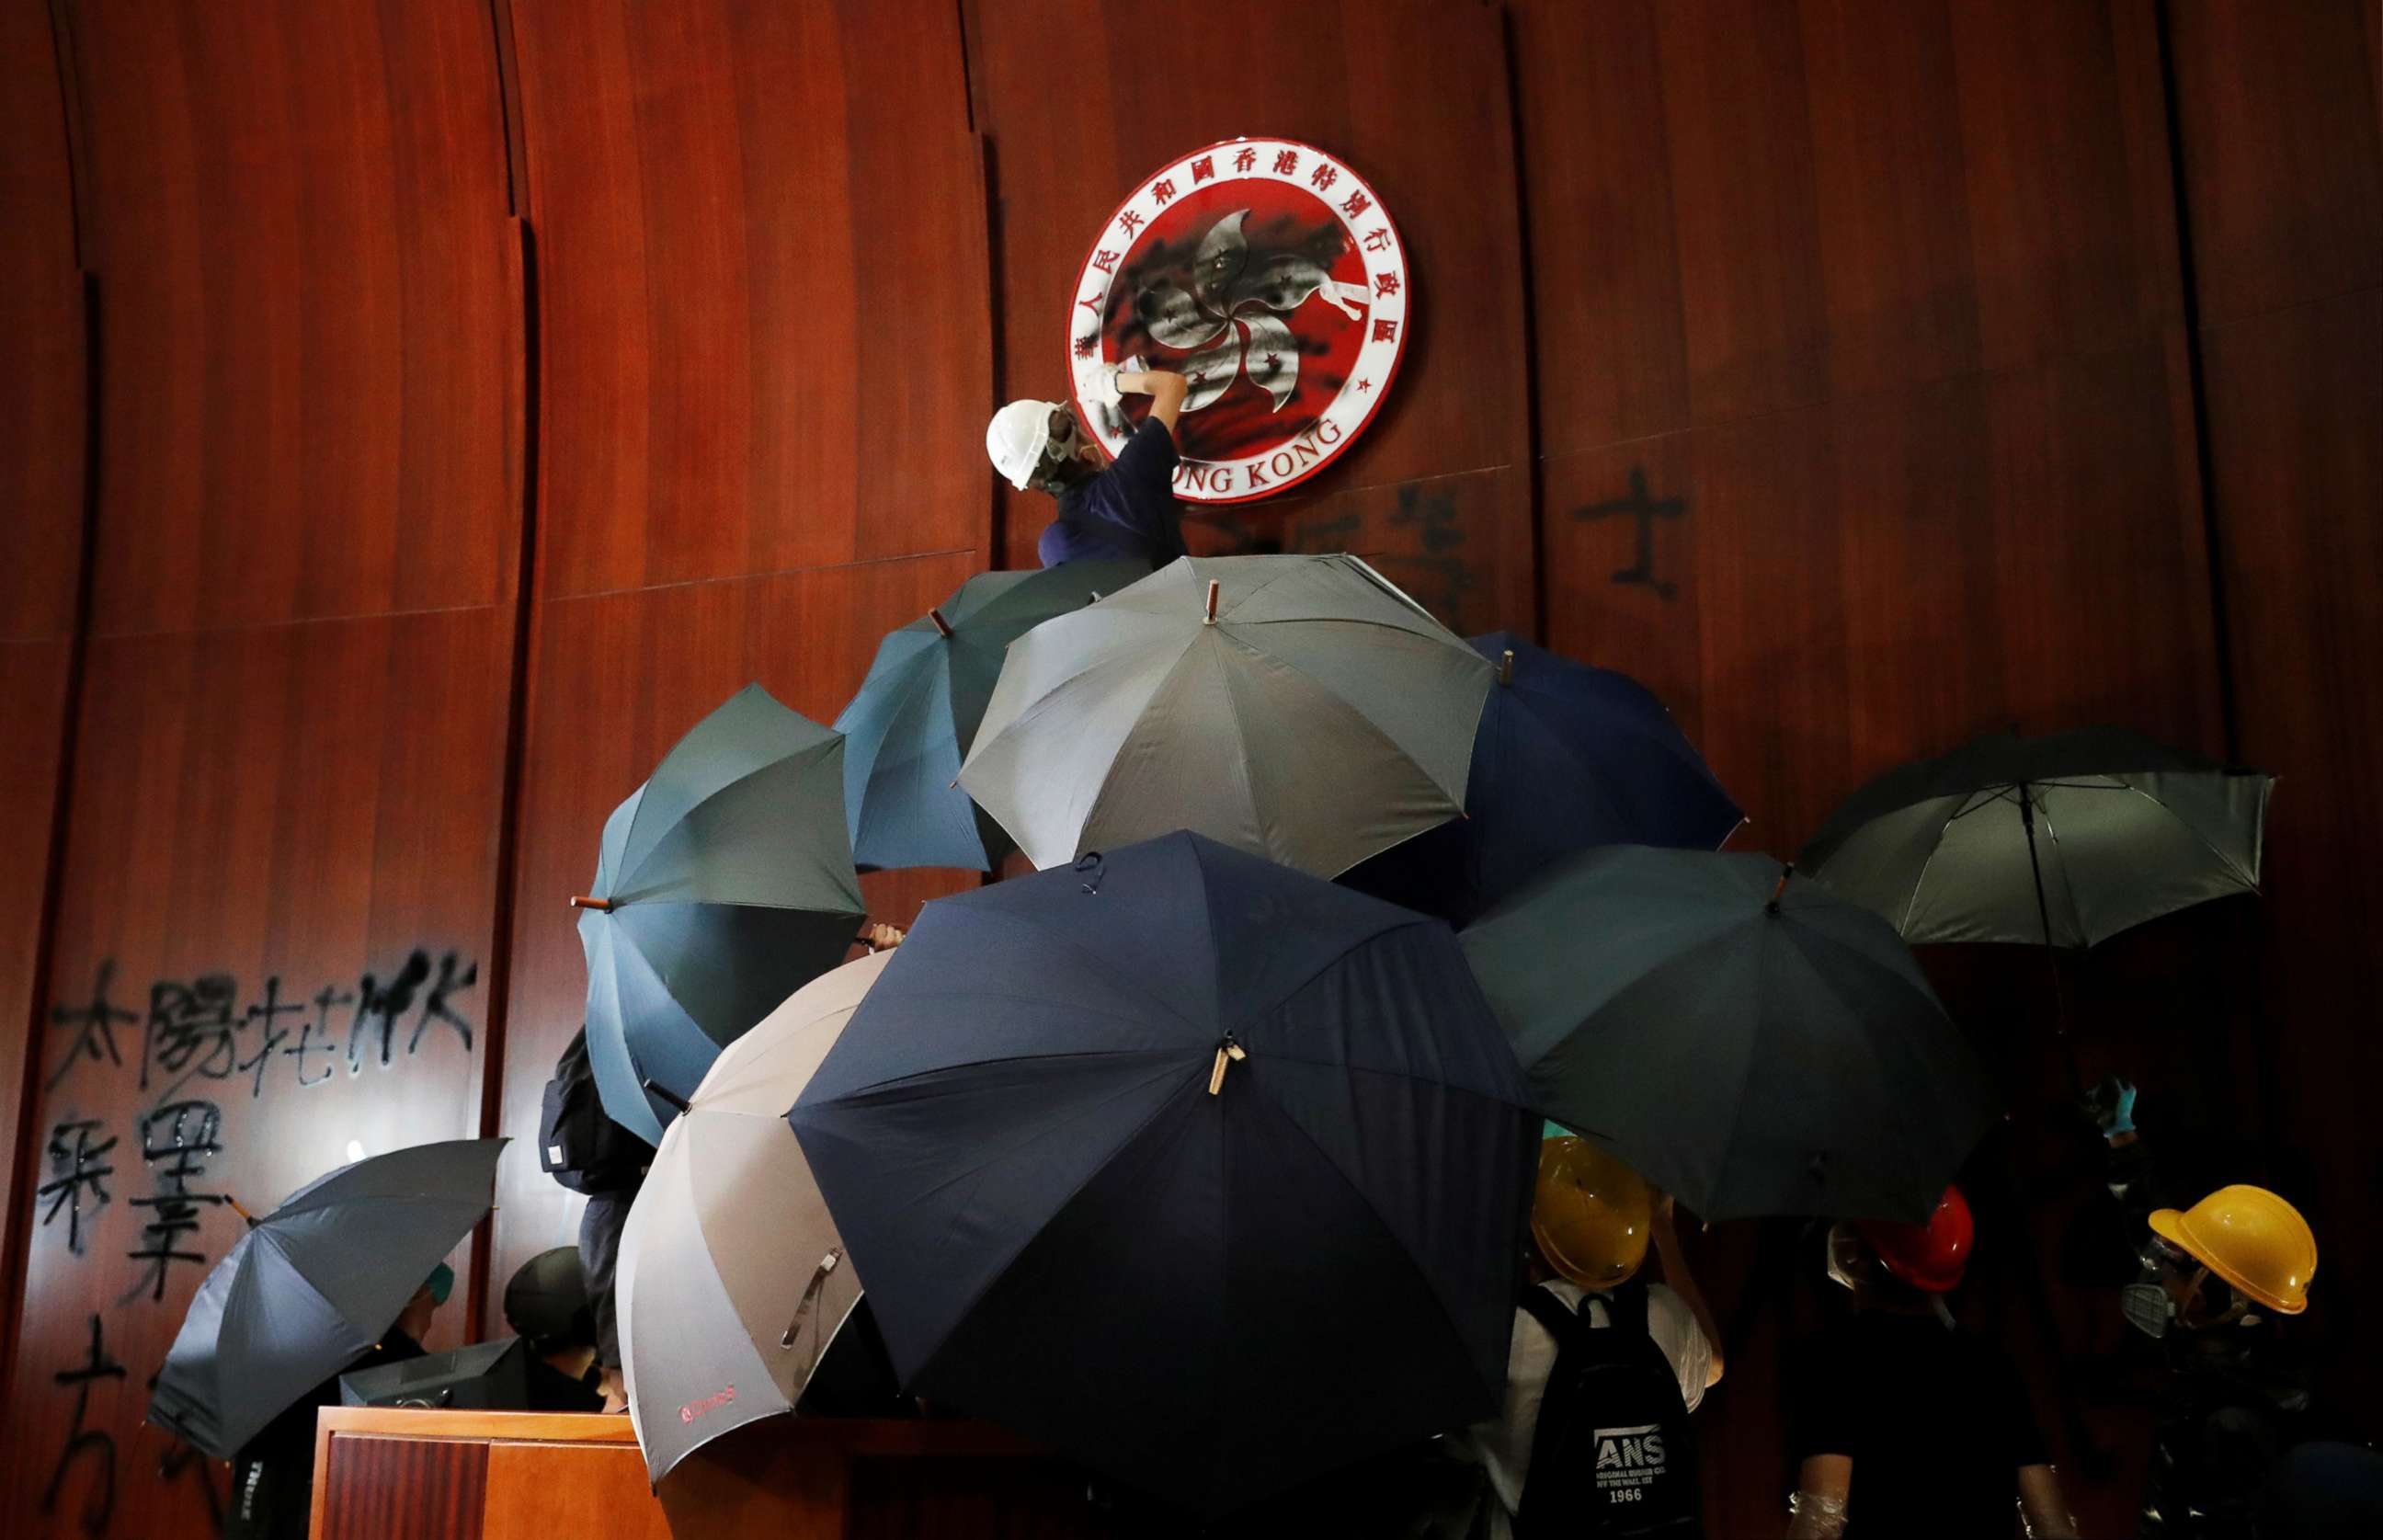 PHOTO: A person sprays paint over Hong Kong's coats of arms inside a chamber after protesters broke into the Legislative Council building during the anniversary of Hong Kong's handover to China in Hong Kong, July 1, 2019.